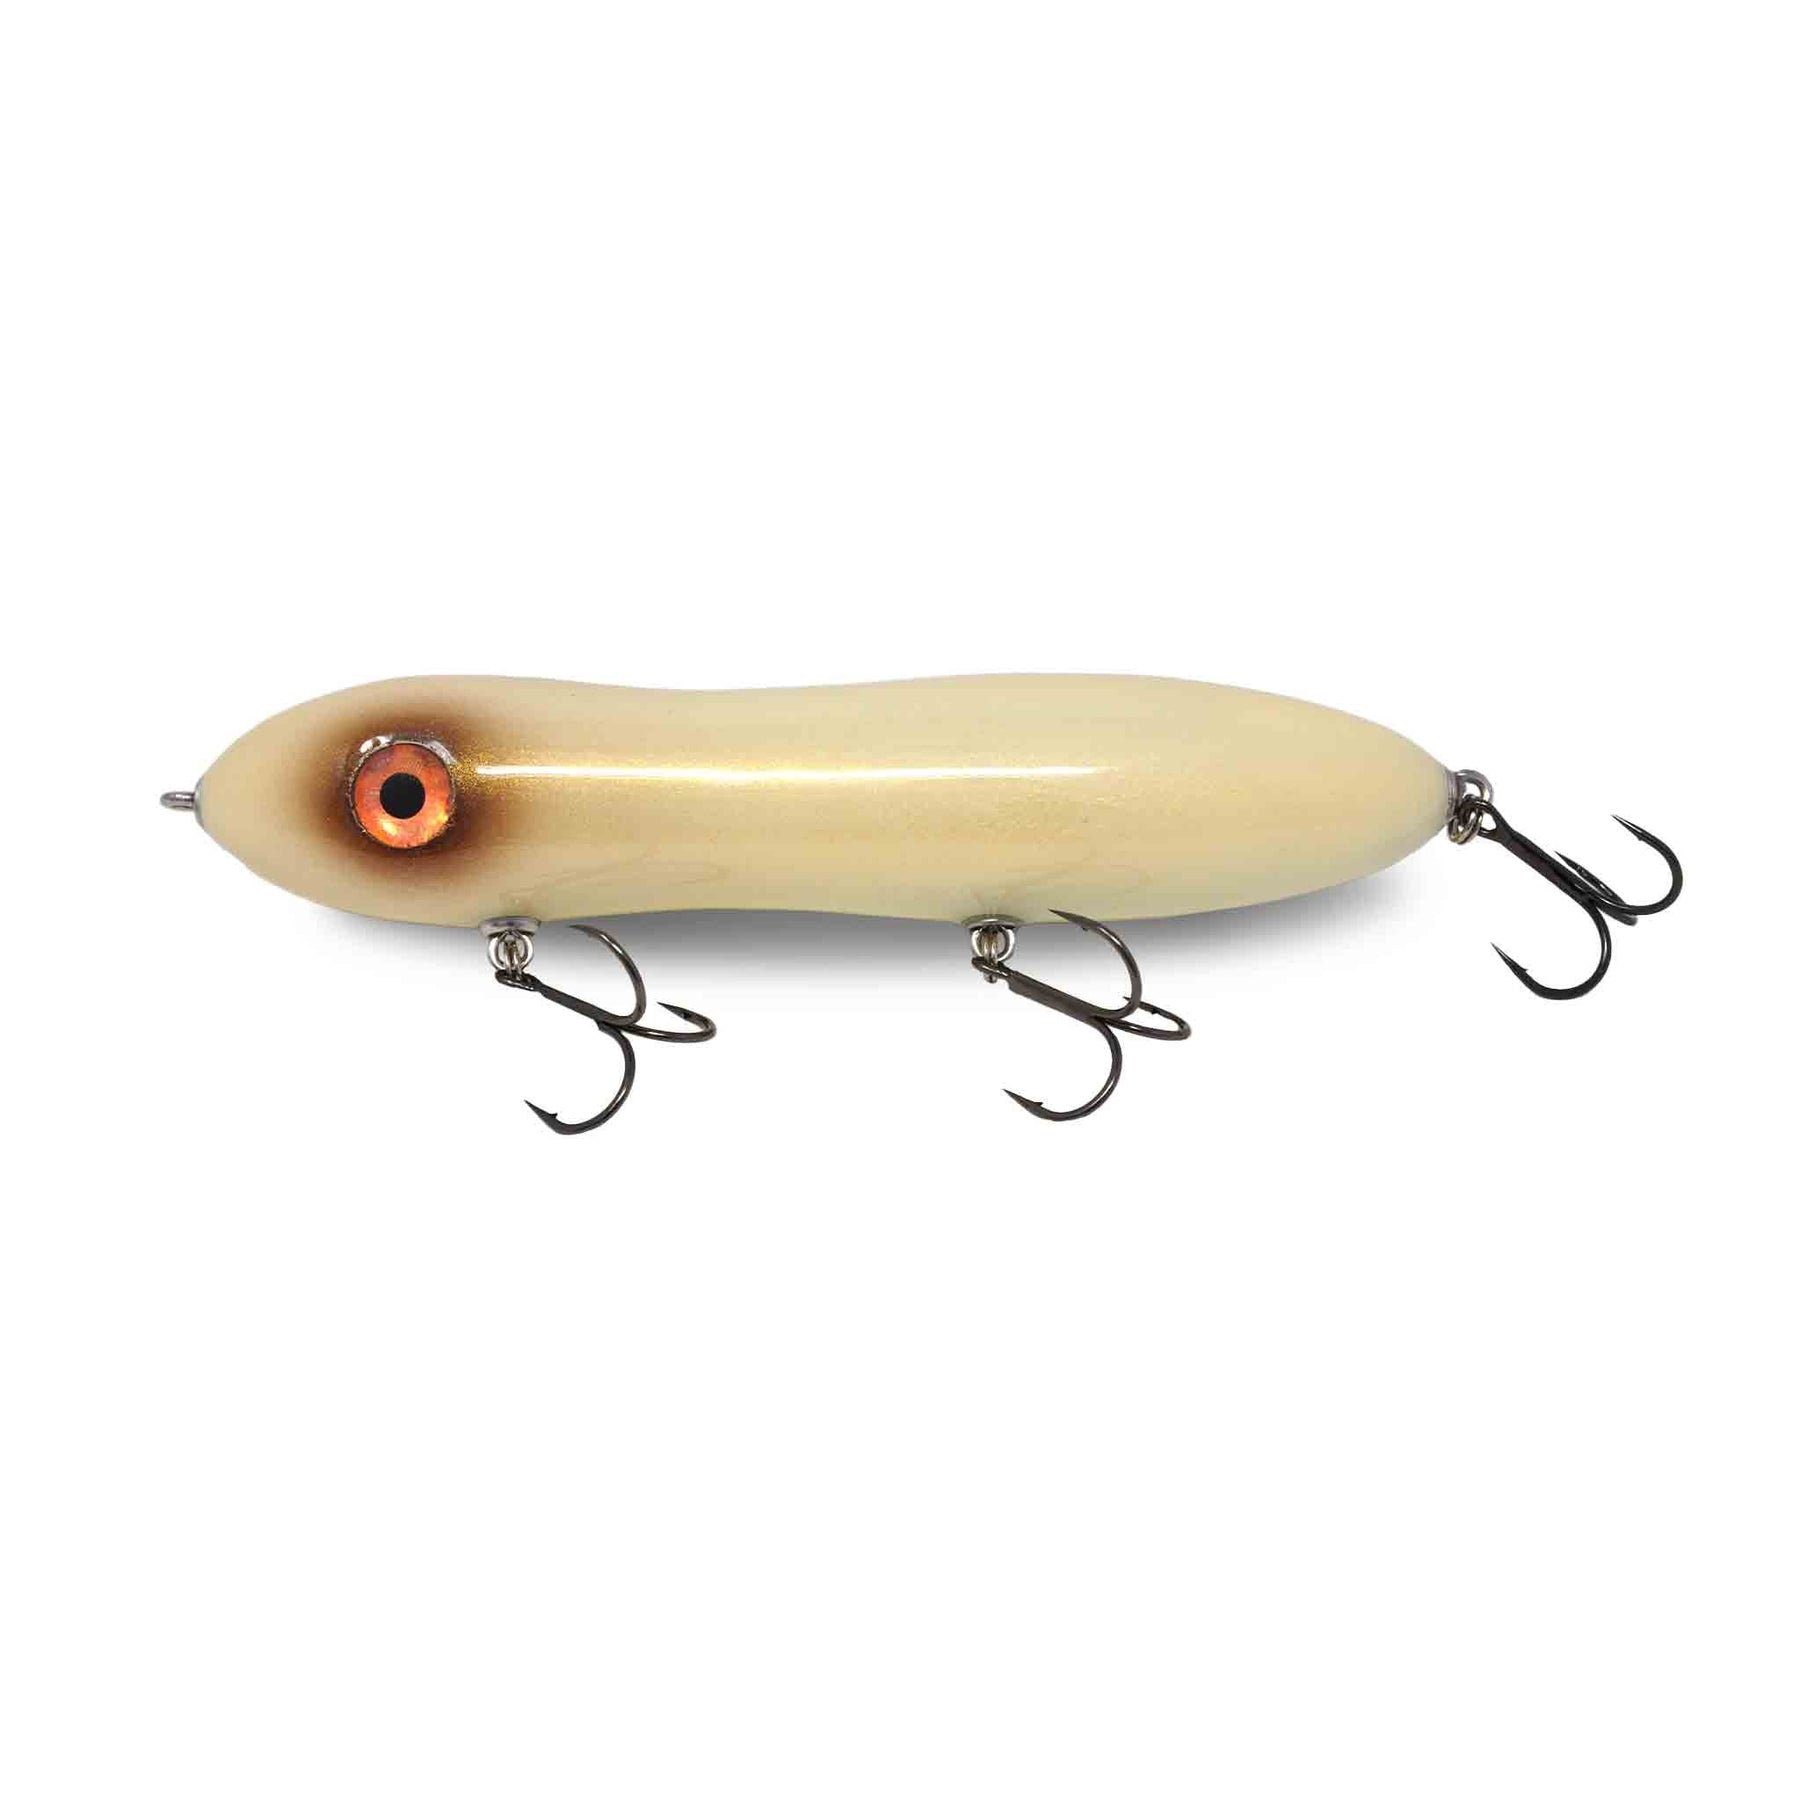 View of Topwater Chaos Tackle Big mama Topwater Bait Bone available at EZOKO Pike and Musky Shop